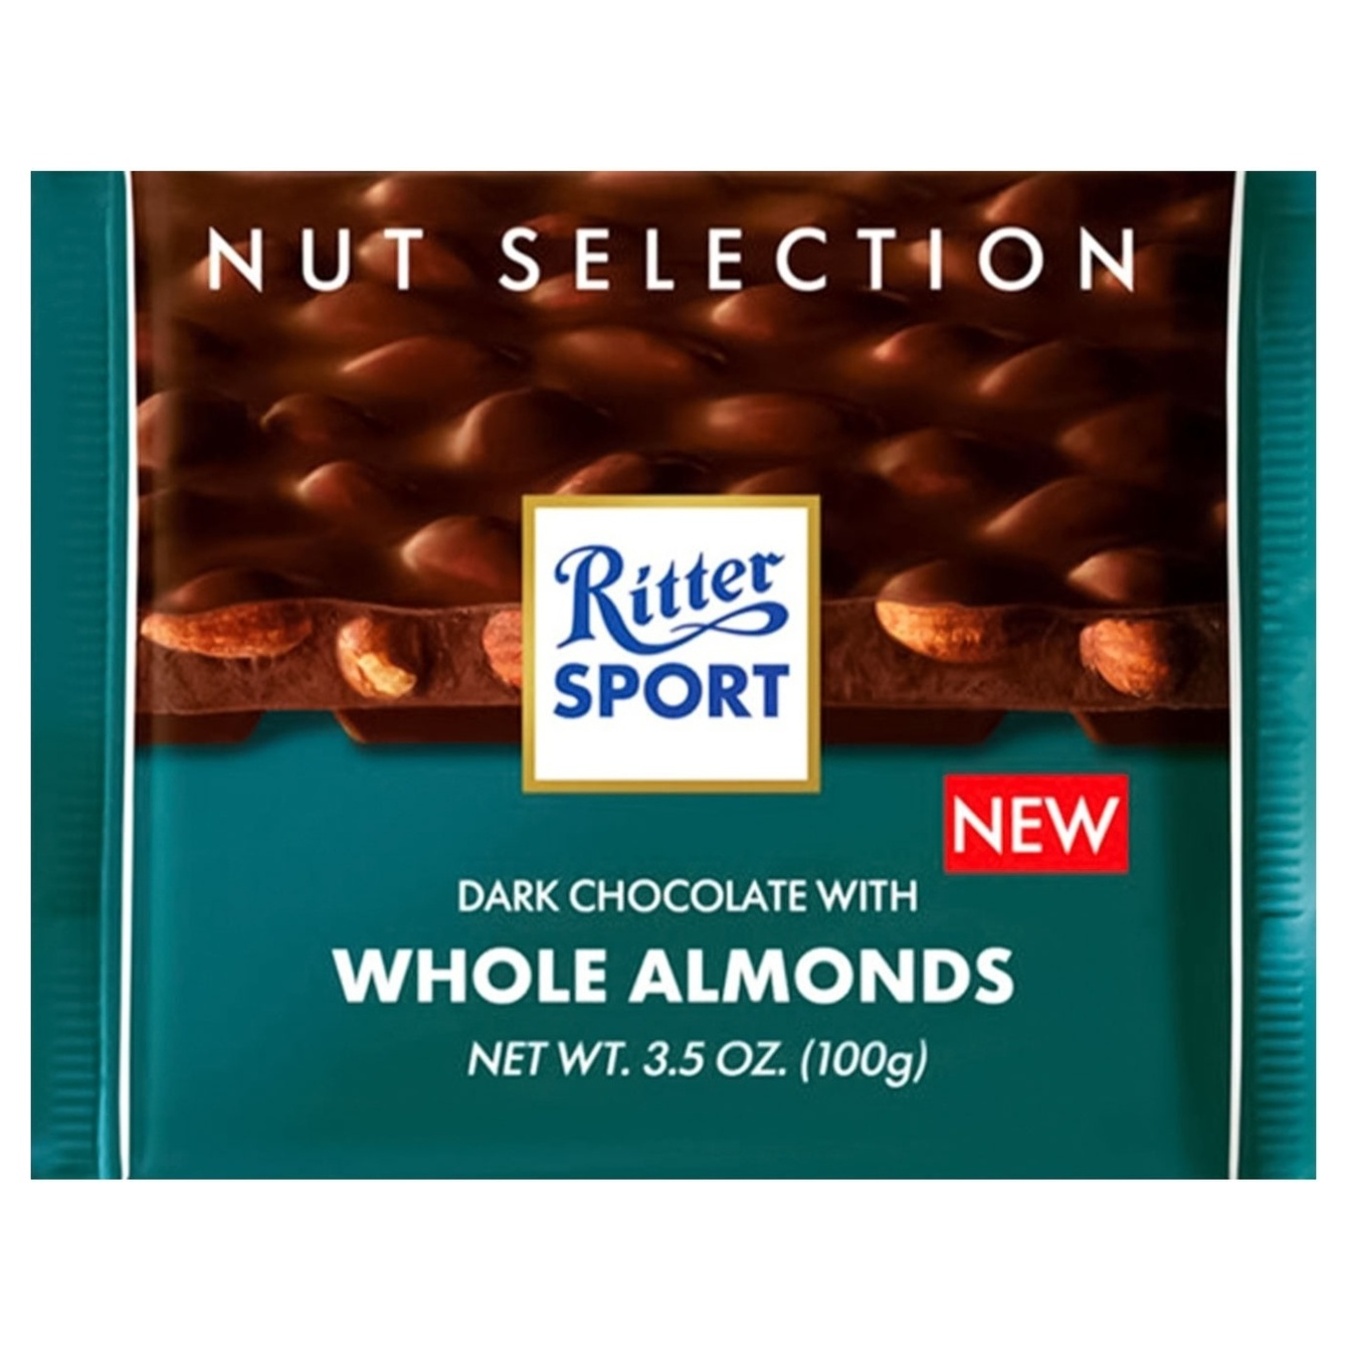 Ritter Sport Pure Whole Almond black chocolate with whole almonds